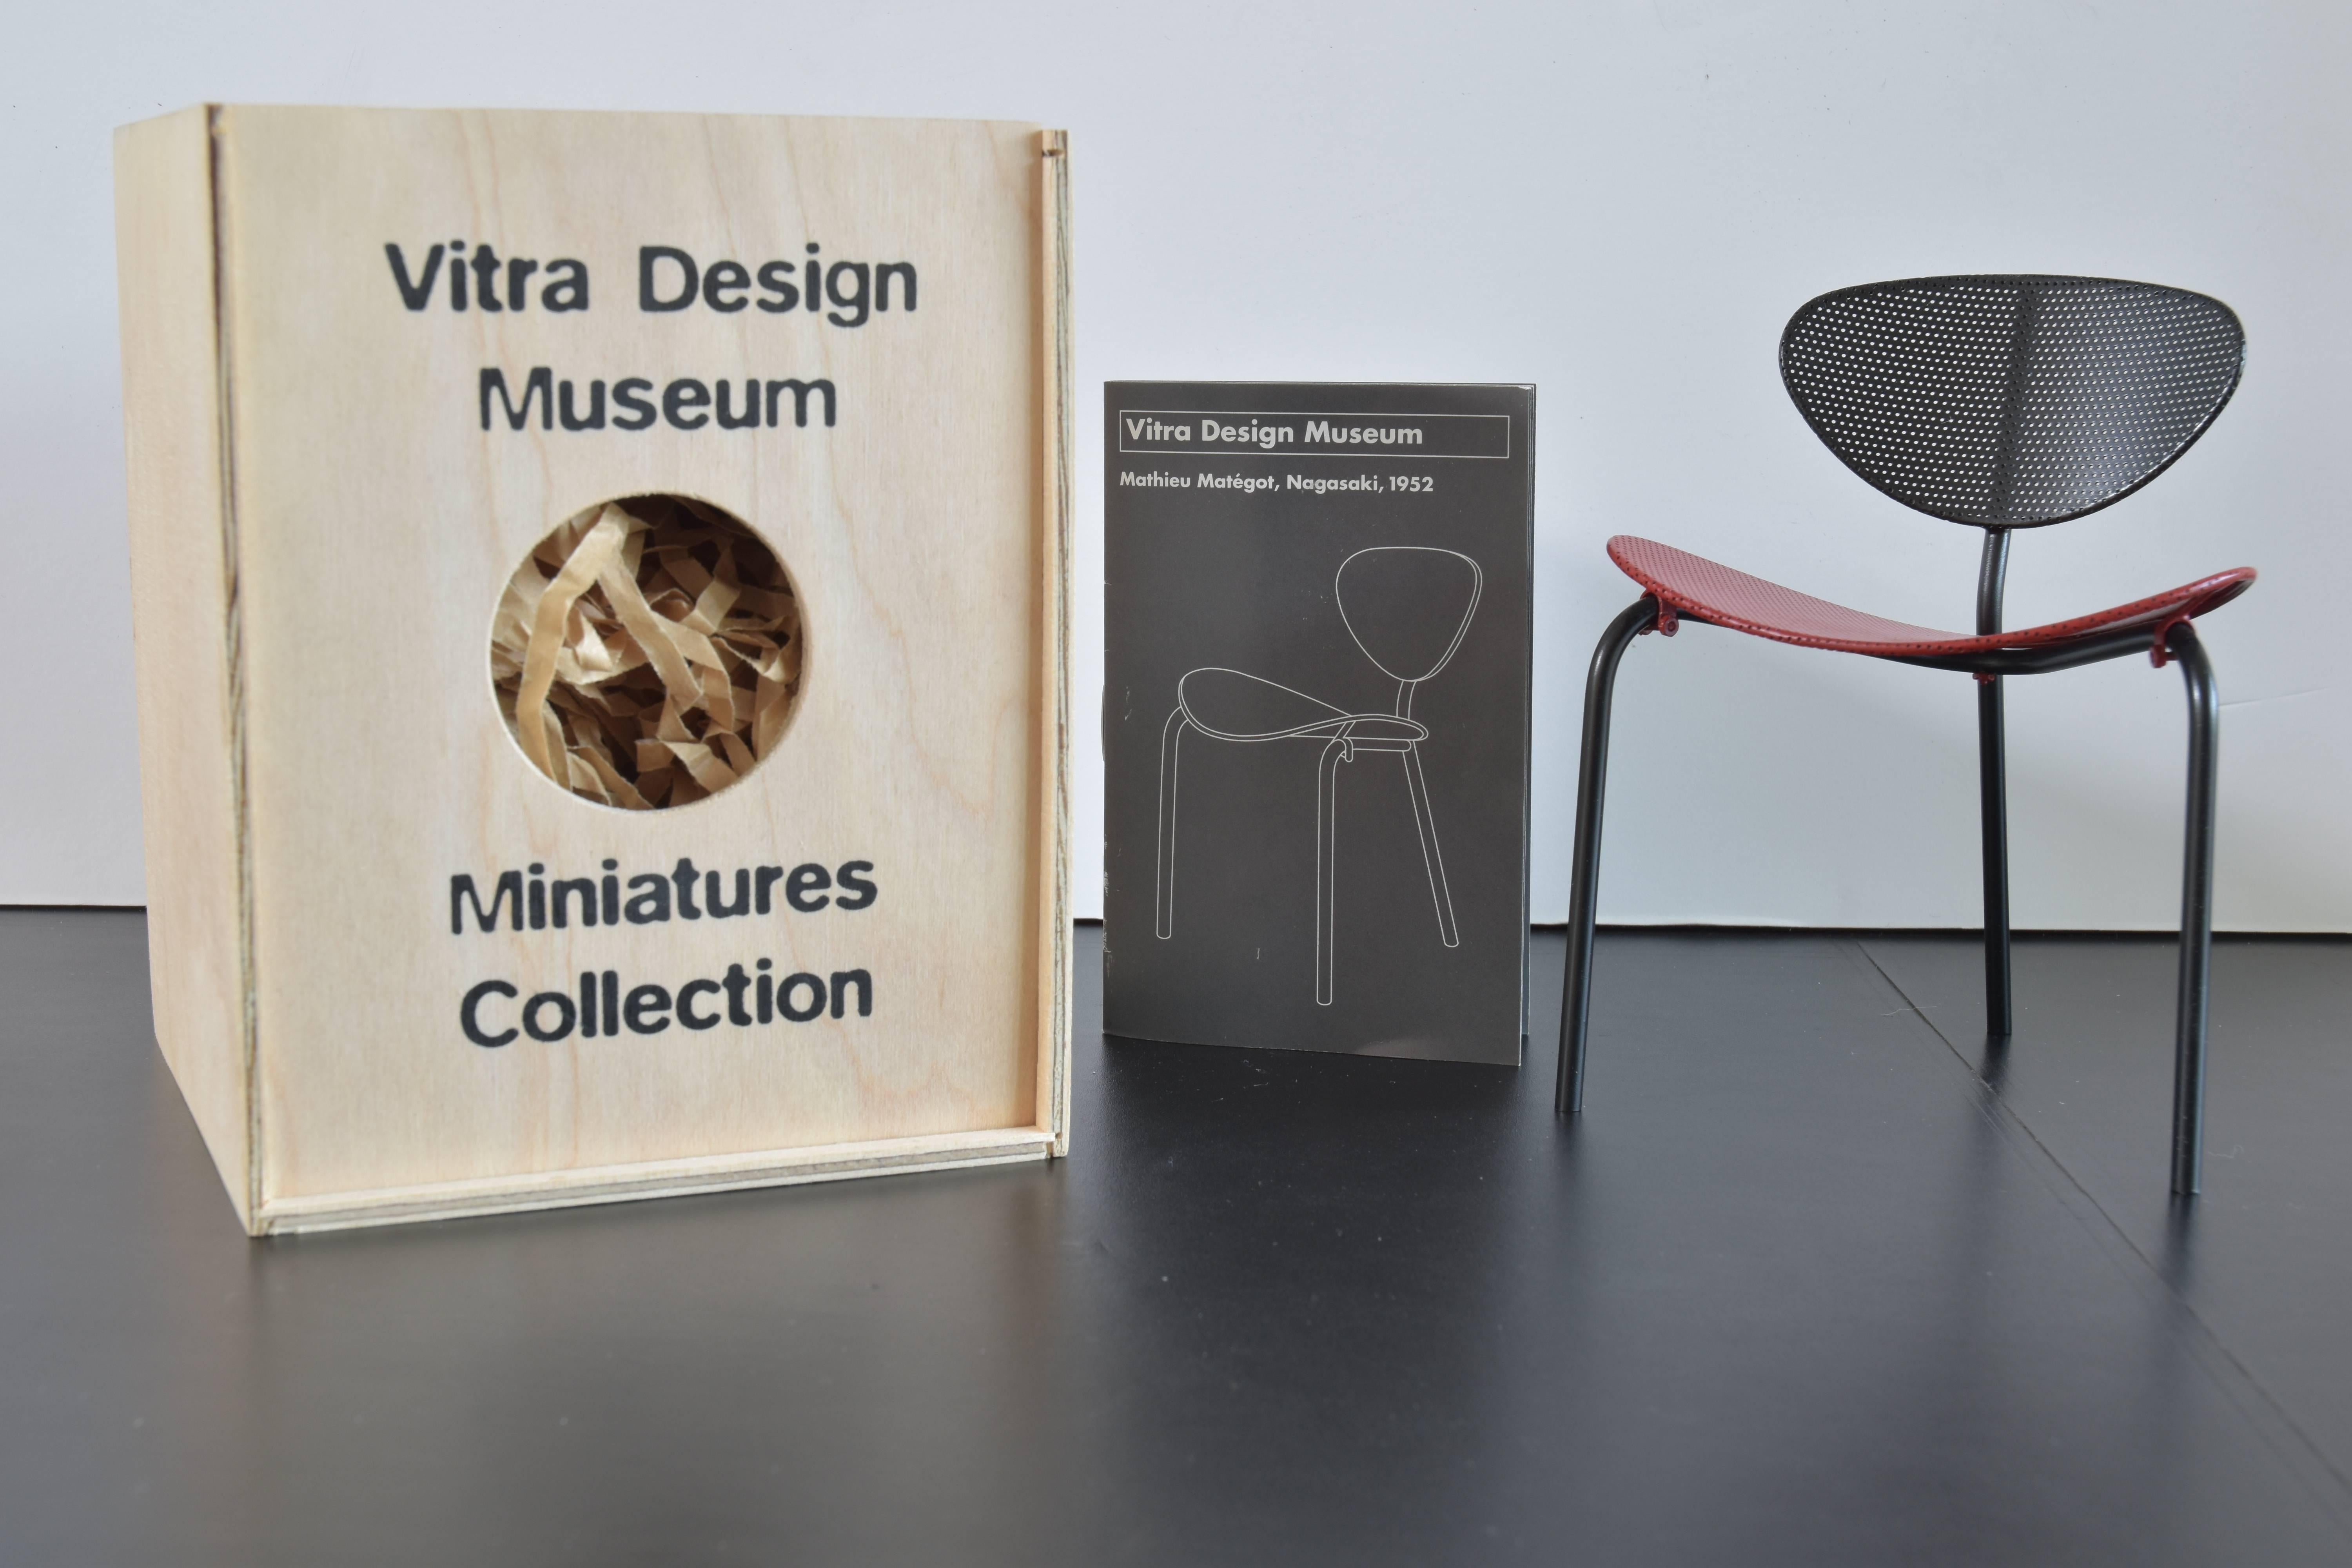 From the Vitra Design Museum collection of miniature chairs a model of the 
Mathieu Matzot Nagasaki chair, 1952.

Included are the model chair, original box and brochure with historical narrative as noted below:

Mathieu Matzot initially took